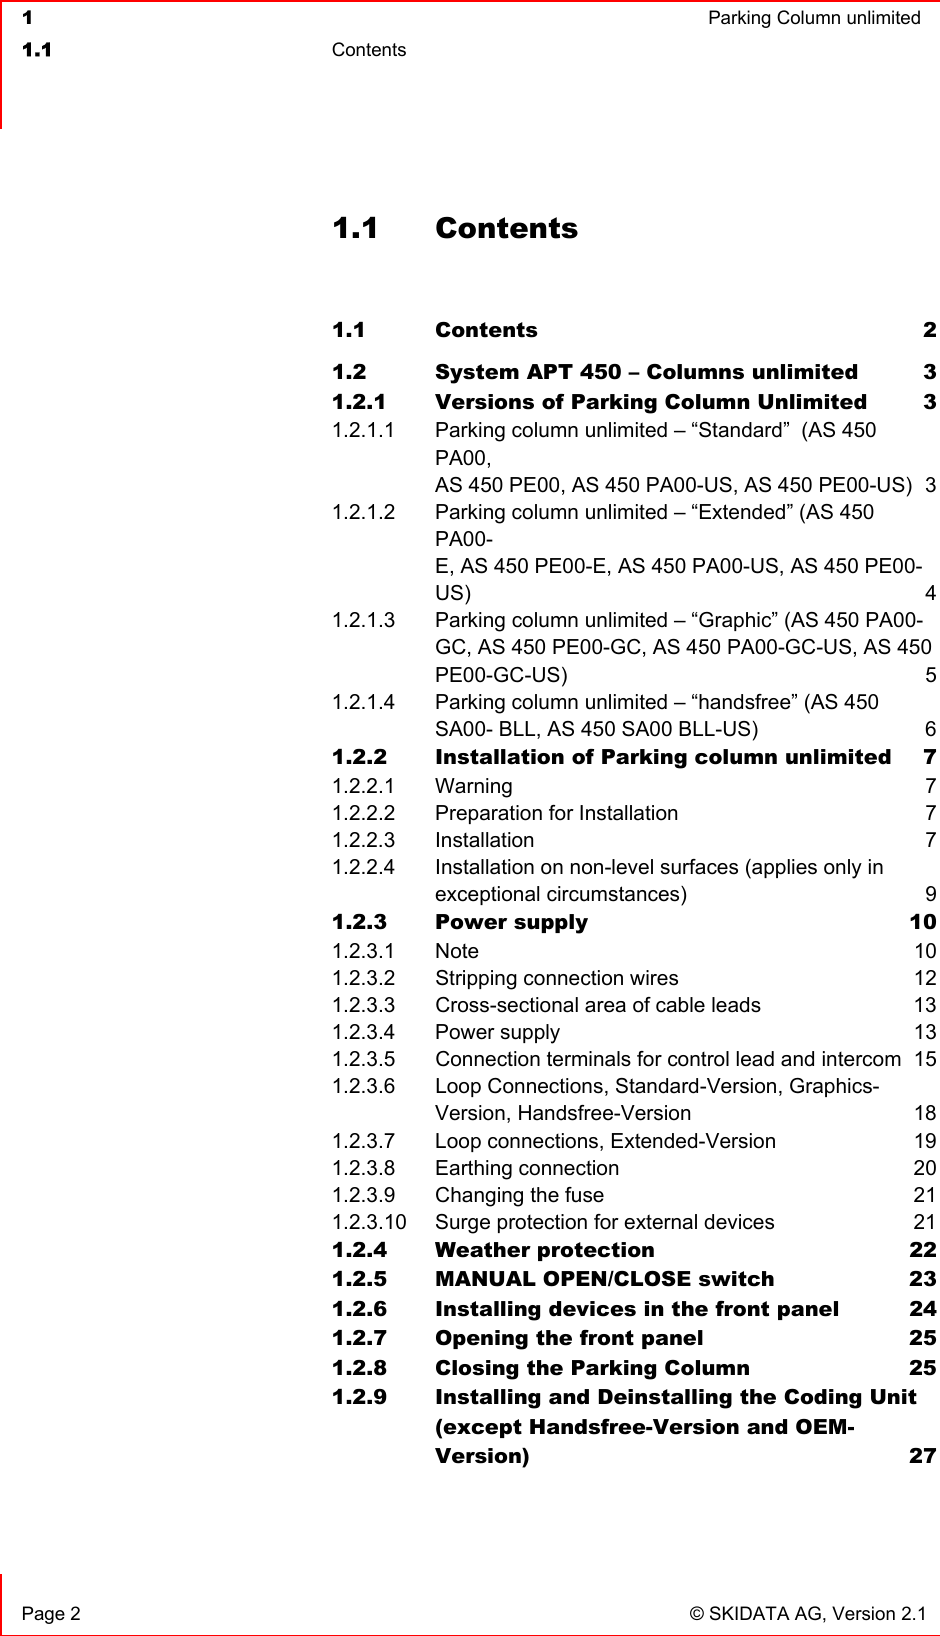  1  Parking Column unlimited1.1 Contents  Page 2  © SKIDATA AG, Version 2.1 1.1 Contents 1.1 Contents 21.2 System APT 450 – Columns unlimited  31.2.1 Versions of Parking Column Unlimited  31.2.1.1 Parking column unlimited – “Standard”  (AS 450 PA00,AS 450 PE00, AS 450 PA00-US, AS 450 PE00-US)  31.2.1.2 Parking column unlimited – “Extended” (AS 450 PA00-E, AS 450 PE00-E, AS 450 PA00-US, AS 450 PE00-US) 41.2.1.3 Parking column unlimited – “Graphic” (AS 450 PA00- GC, AS 450 PE00-GC, AS 450 PA00-GC-US, AS 450 PE00-GC-US) 51.2.1.4 Parking column unlimited – “handsfree” (AS 450SA00- BLL, AS 450 SA00 BLL-US)  61.2.2 Installation of Parking column unlimited  71.2.2.1 Warning 71.2.2.2 Preparation for Installation  71.2.2.3 Installation 71.2.2.4 Installation on non-level surfaces (applies only inexceptional circumstances)  91.2.3 Power supply  101.2.3.1 Note 101.2.3.2 Stripping connection wires  121.2.3.3 Cross-sectional area of cable leads  131.2.3.4 Power supply  131.2.3.5 Connection terminals for control lead and intercom  151.2.3.6 Loop Connections, Standard-Version, Graphics- Version, Handsfree-Version  181.2.3.7 Loop connections, Extended-Version  191.2.3.8 Earthing connection  201.2.3.9 Changing the fuse  211.2.3.10 Surge protection for external devices  211.2.4 Weather protection  221.2.5 MANUAL OPEN/CLOSE switch  231.2.6 Installing devices in the front panel  241.2.7 Opening the front panel  251.2.8 Closing the Parking Column  251.2.9 Installing and Deinstalling the Coding Unit(except Handsfree-Version and OEM-Version) 27